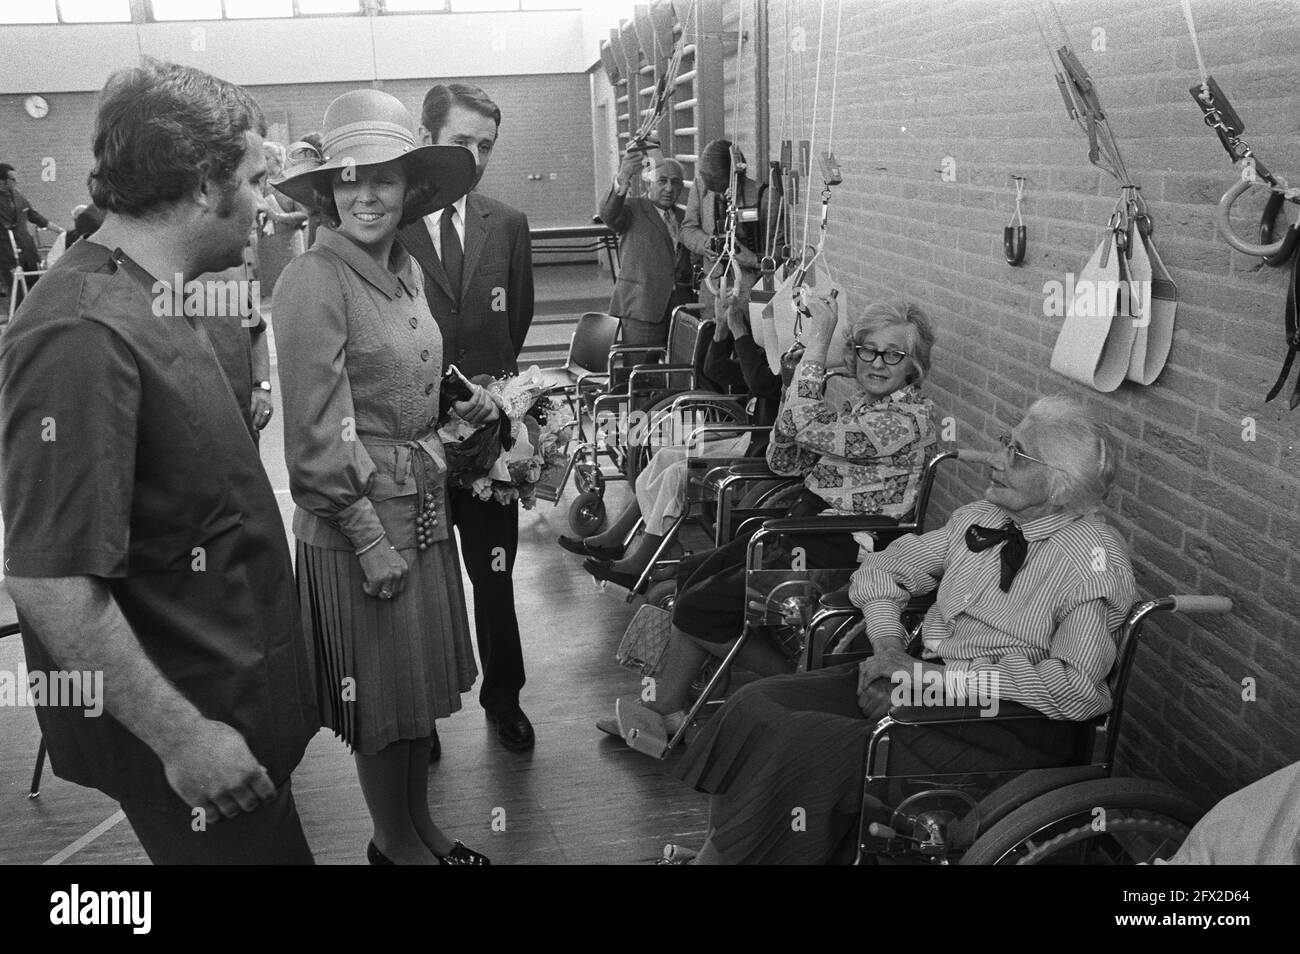 Princess Beatrix opens hospital complex Triotel Leeuwarden Princess Beatrix speaks to some patients rehabilitation center, August 10, 1971, PATIENTS, openings, rehabilitation centers, The Netherlands, 20th century press agency photo, news to remember, documentary, historic photography 1945-1990, visual stories, human history of the Twentieth Century, capturing moments in time Stock Photo